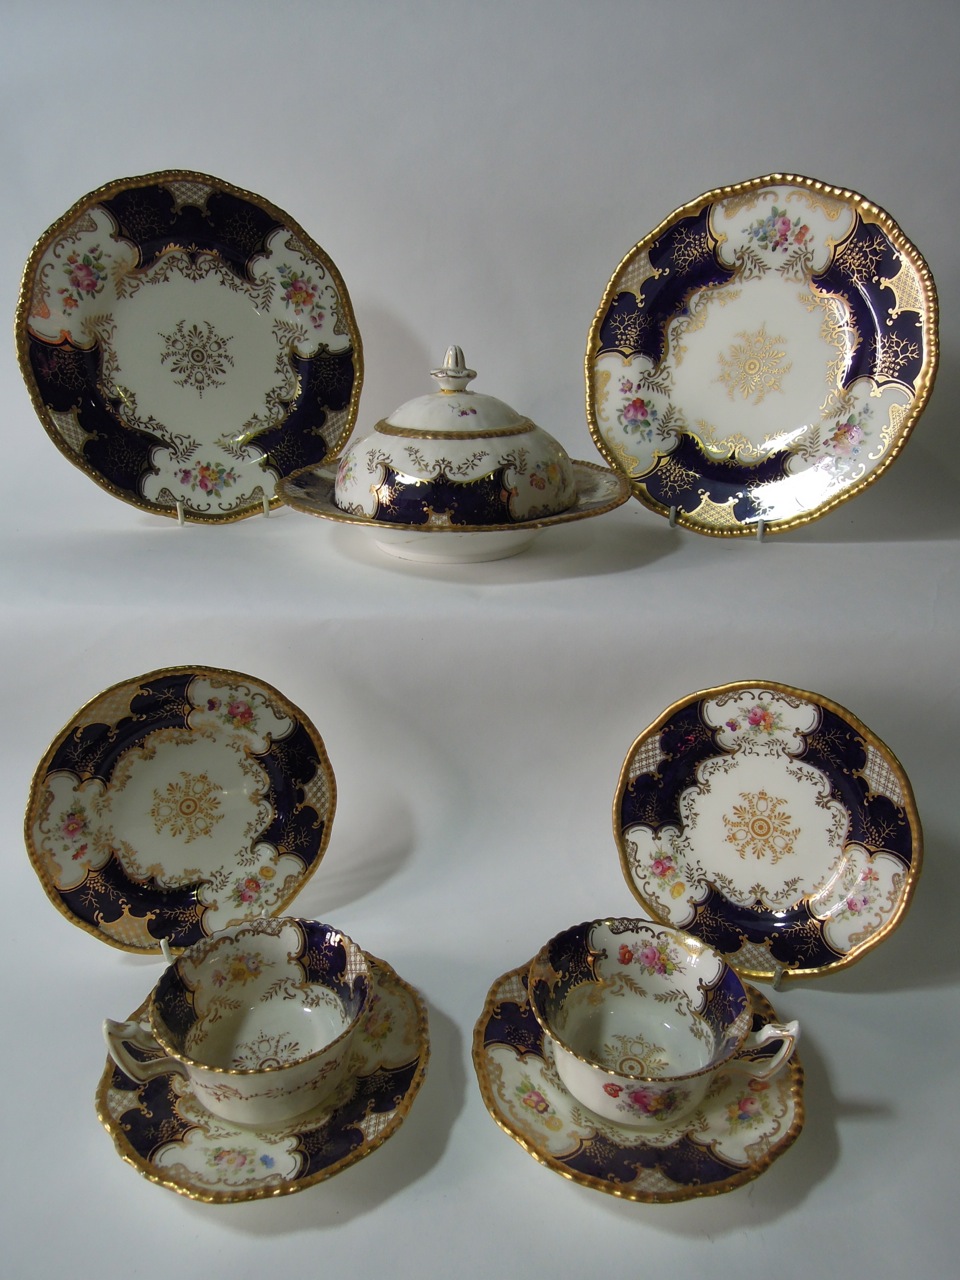 A large collection of Coalport batwing tea wares circa 1900 with gadrooned borders decorated